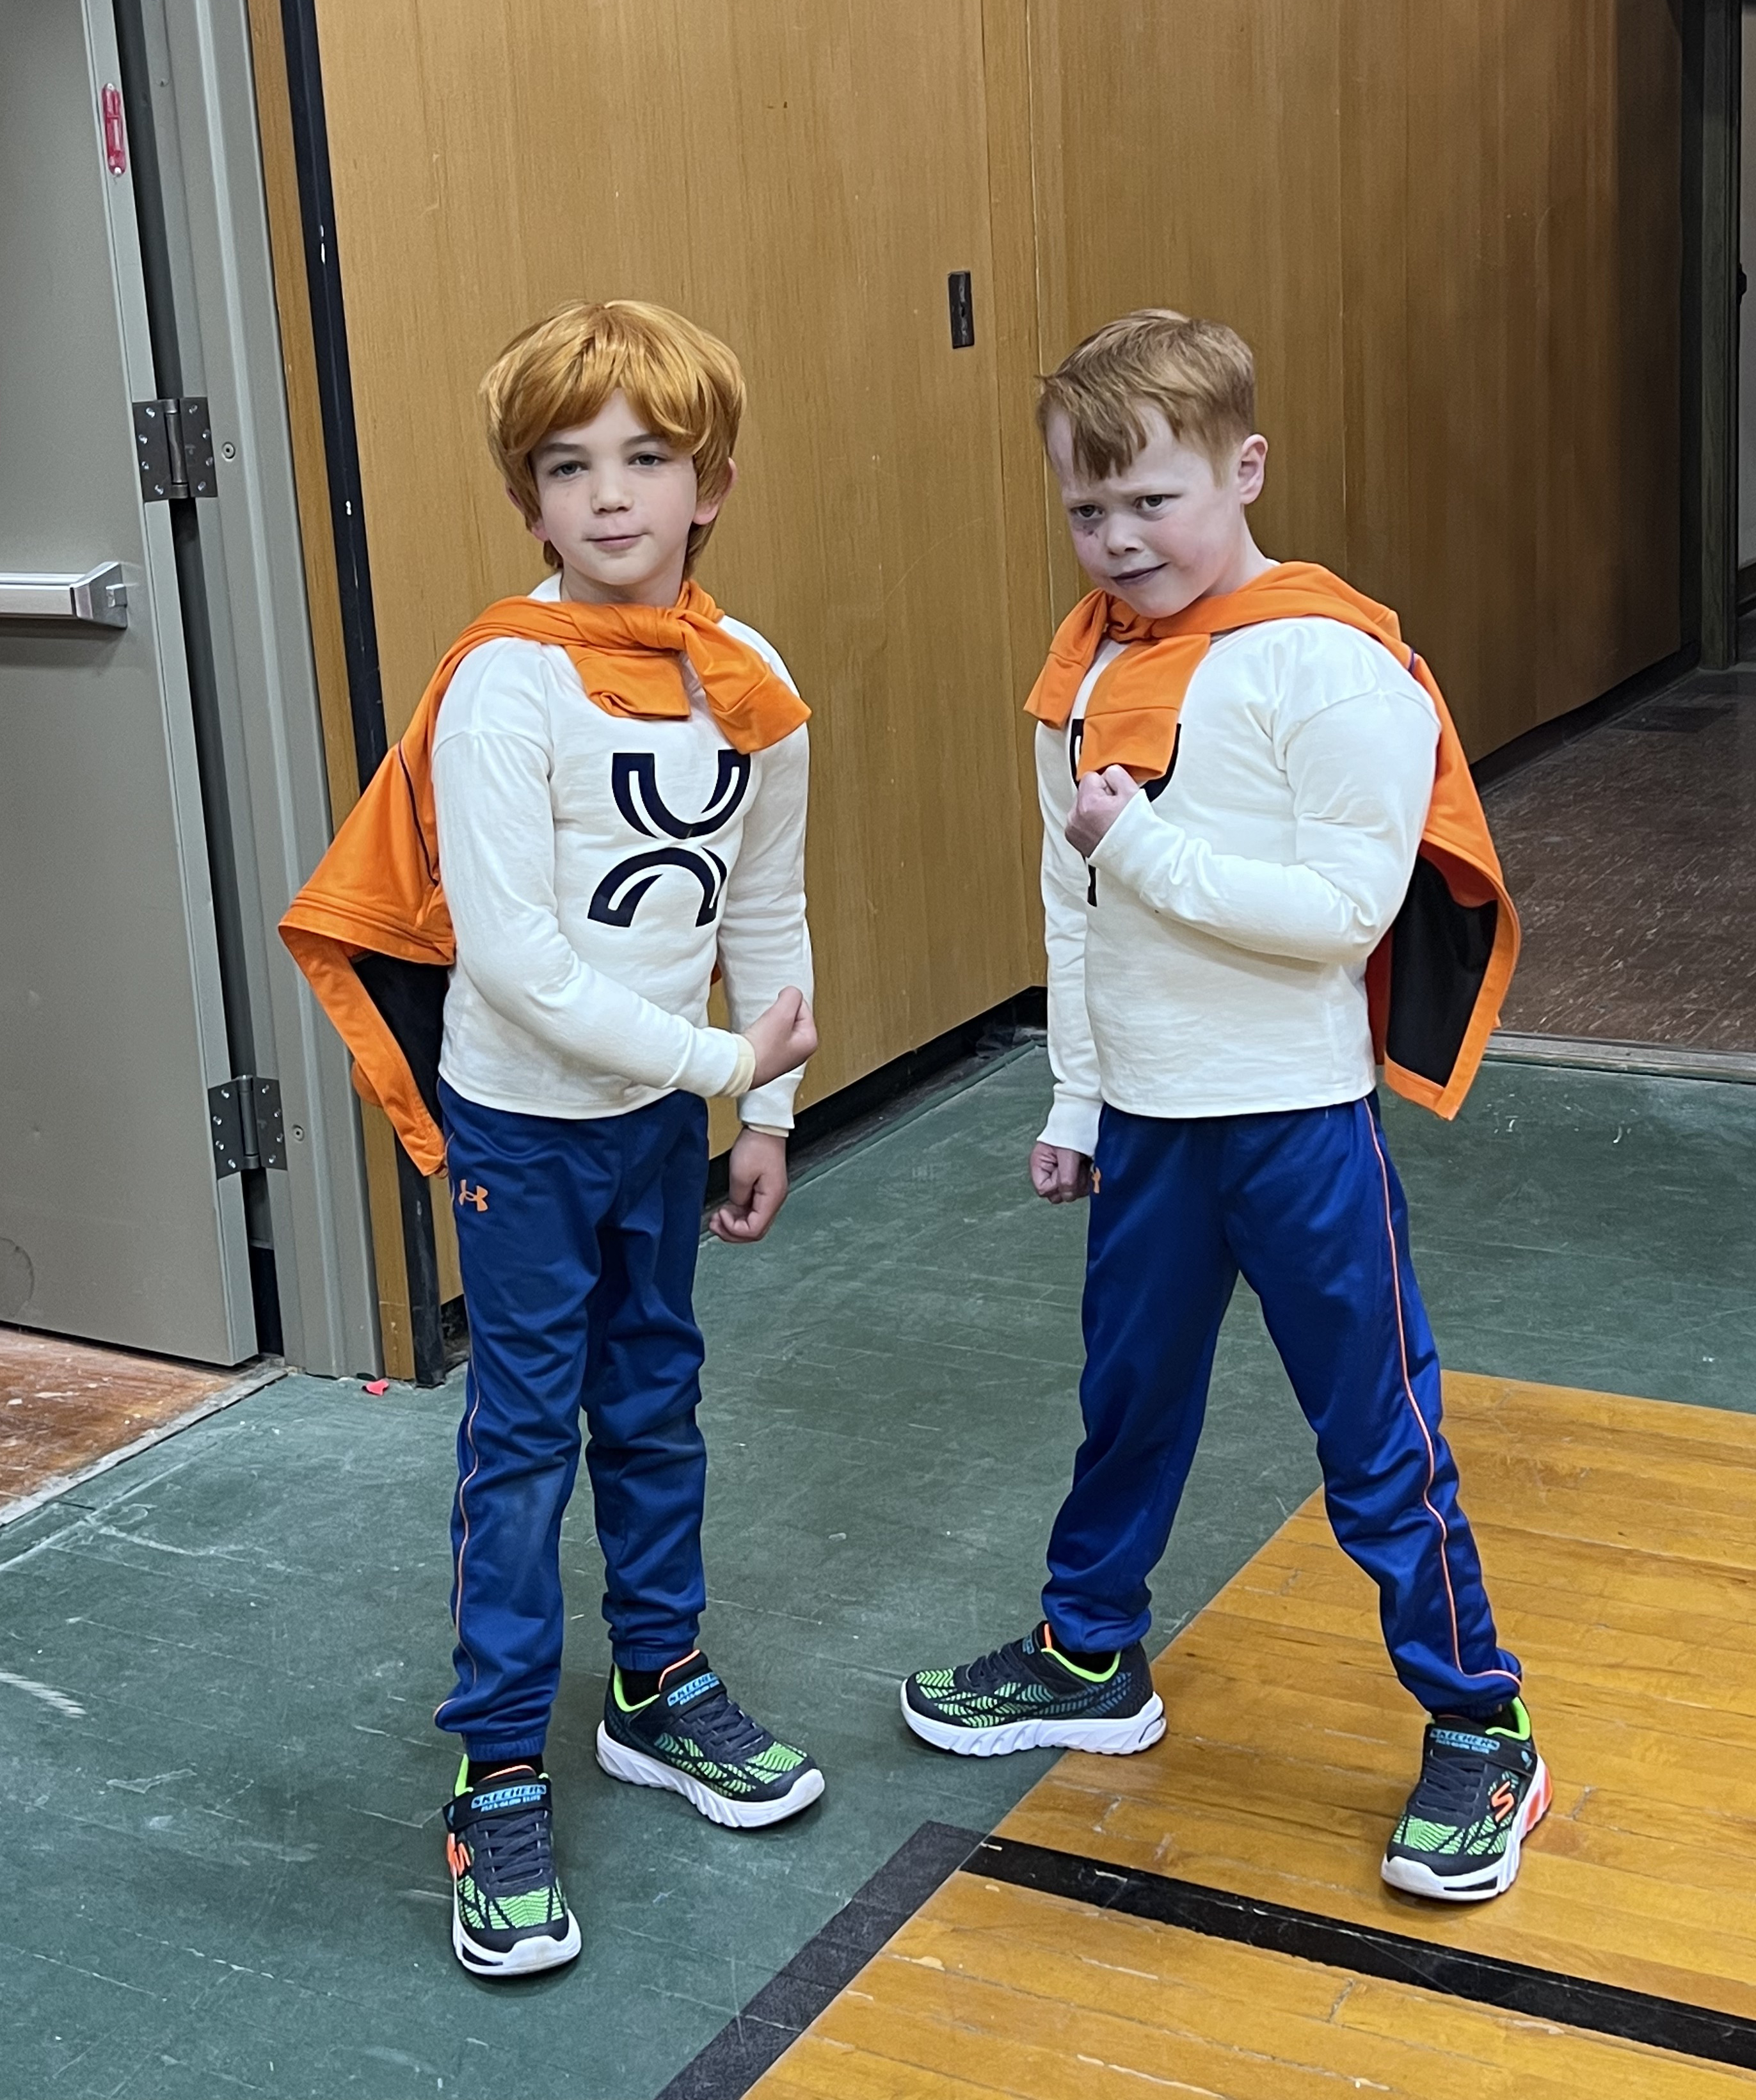 Marshall Sepello, 9, writes, directs and stars in his own superhero movie, "Marshall Man," shot in Liverpool, N.Y., with help from Make-A-Wish CNY and American High. At left is Marshall's stunt double, Eli Caita-Cherkas. (Molle DeBartolo | American High)